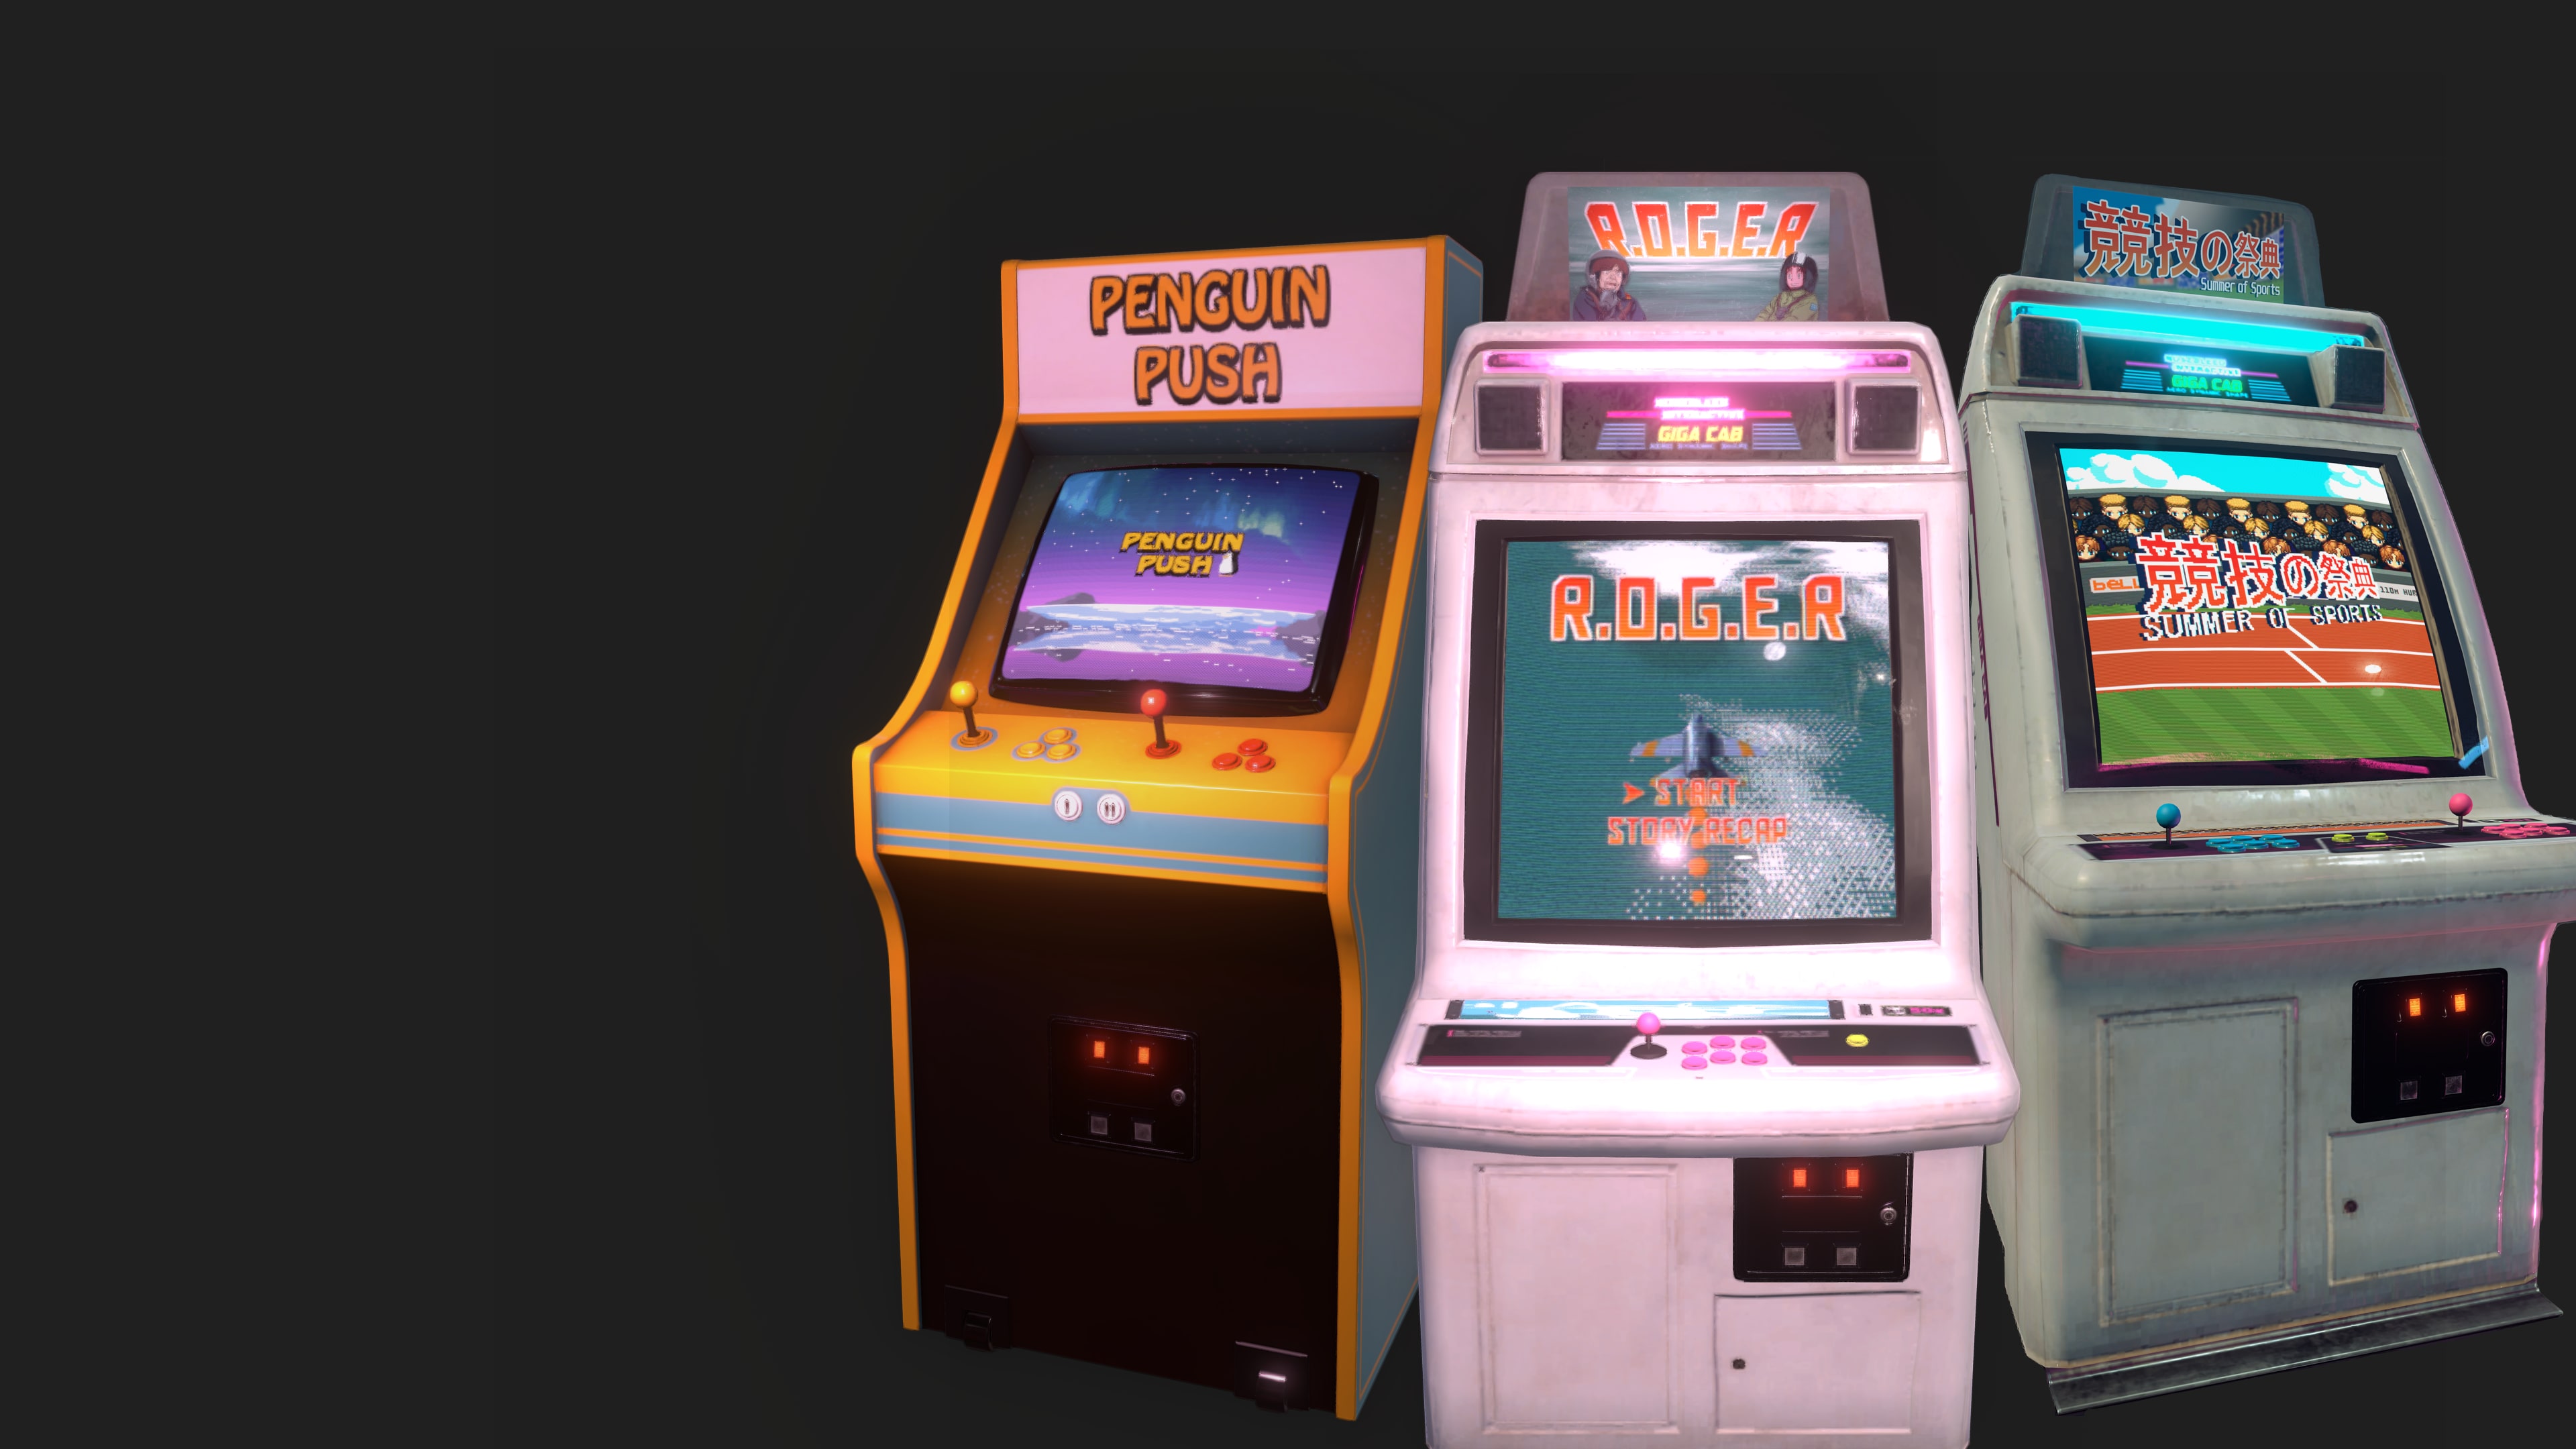 Arcade Paradise - Coin-Op Pack 2